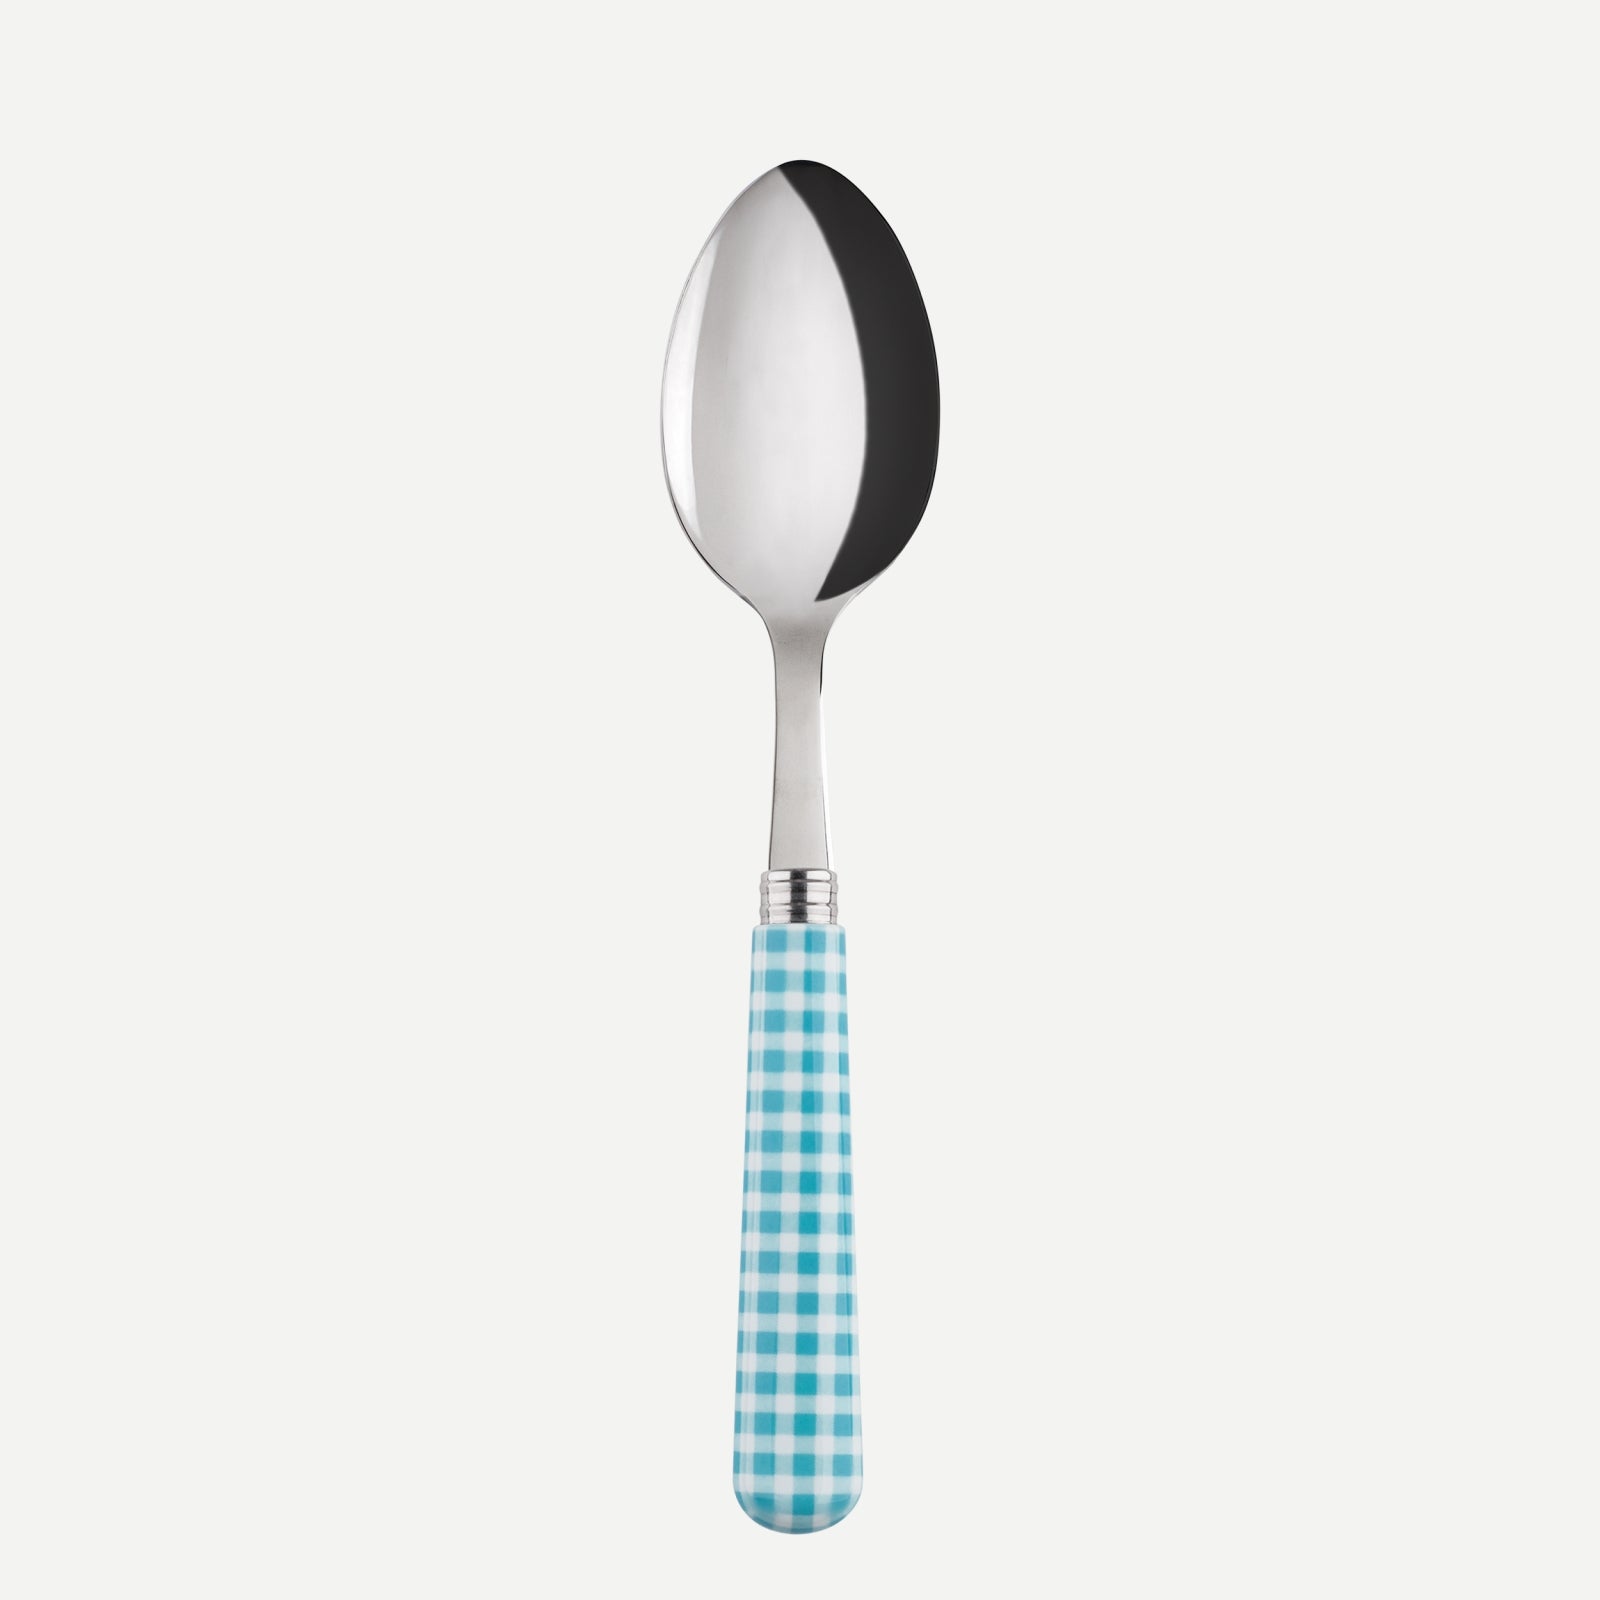 Soup spoon - Gingham - Turquoise